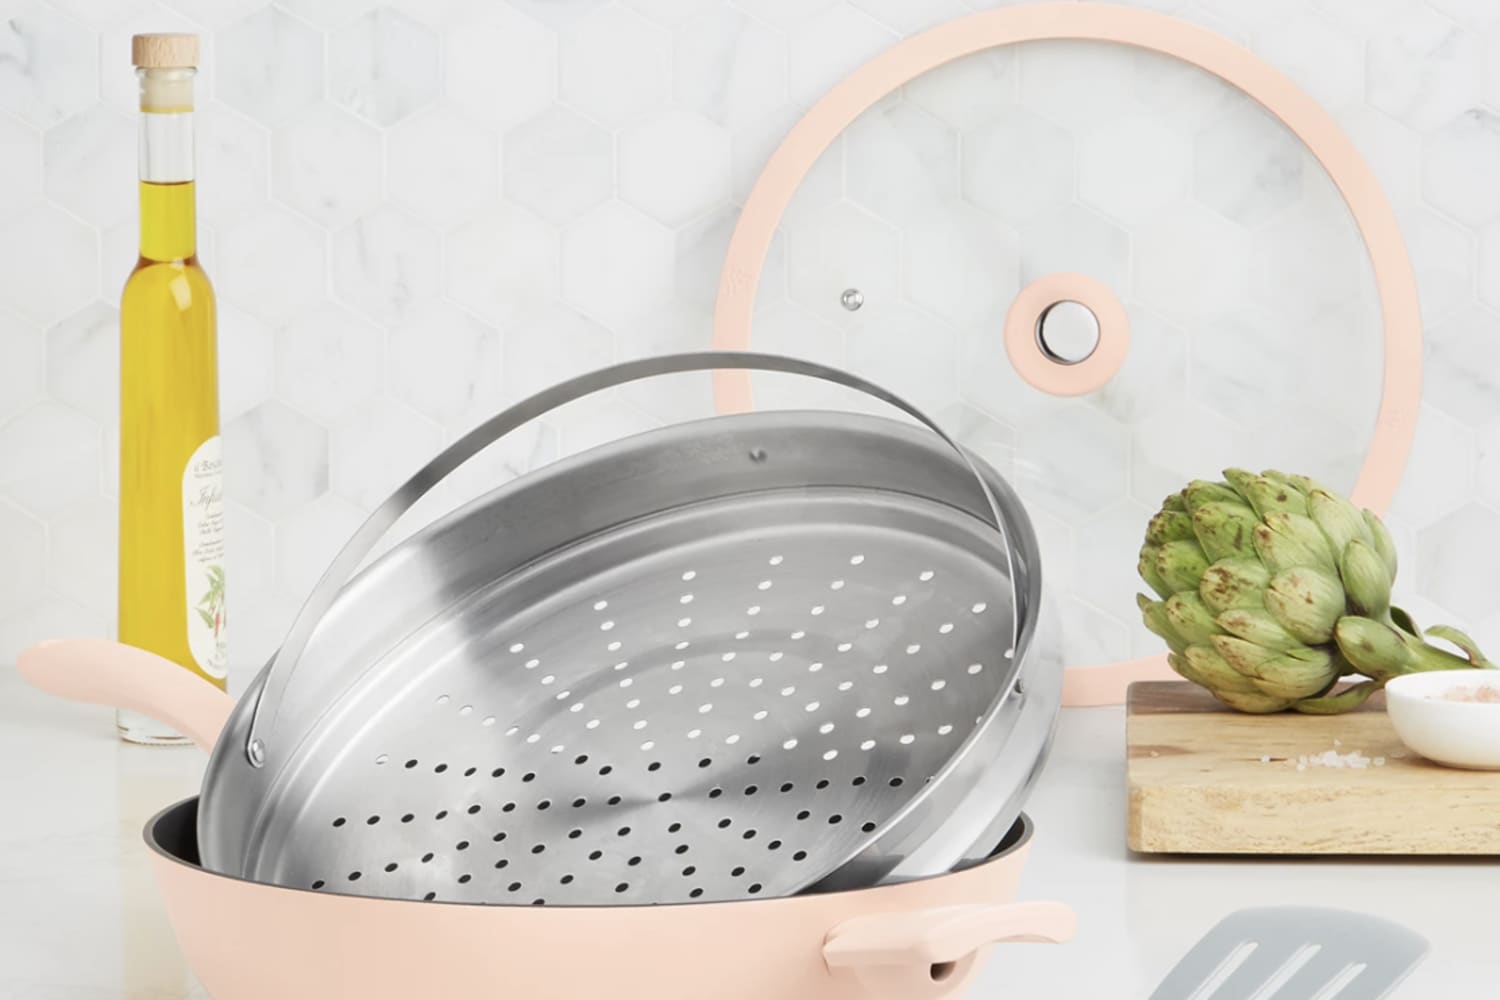 Macy's New All-in-One Pan Is the Ultimate Everyday Pan You Need